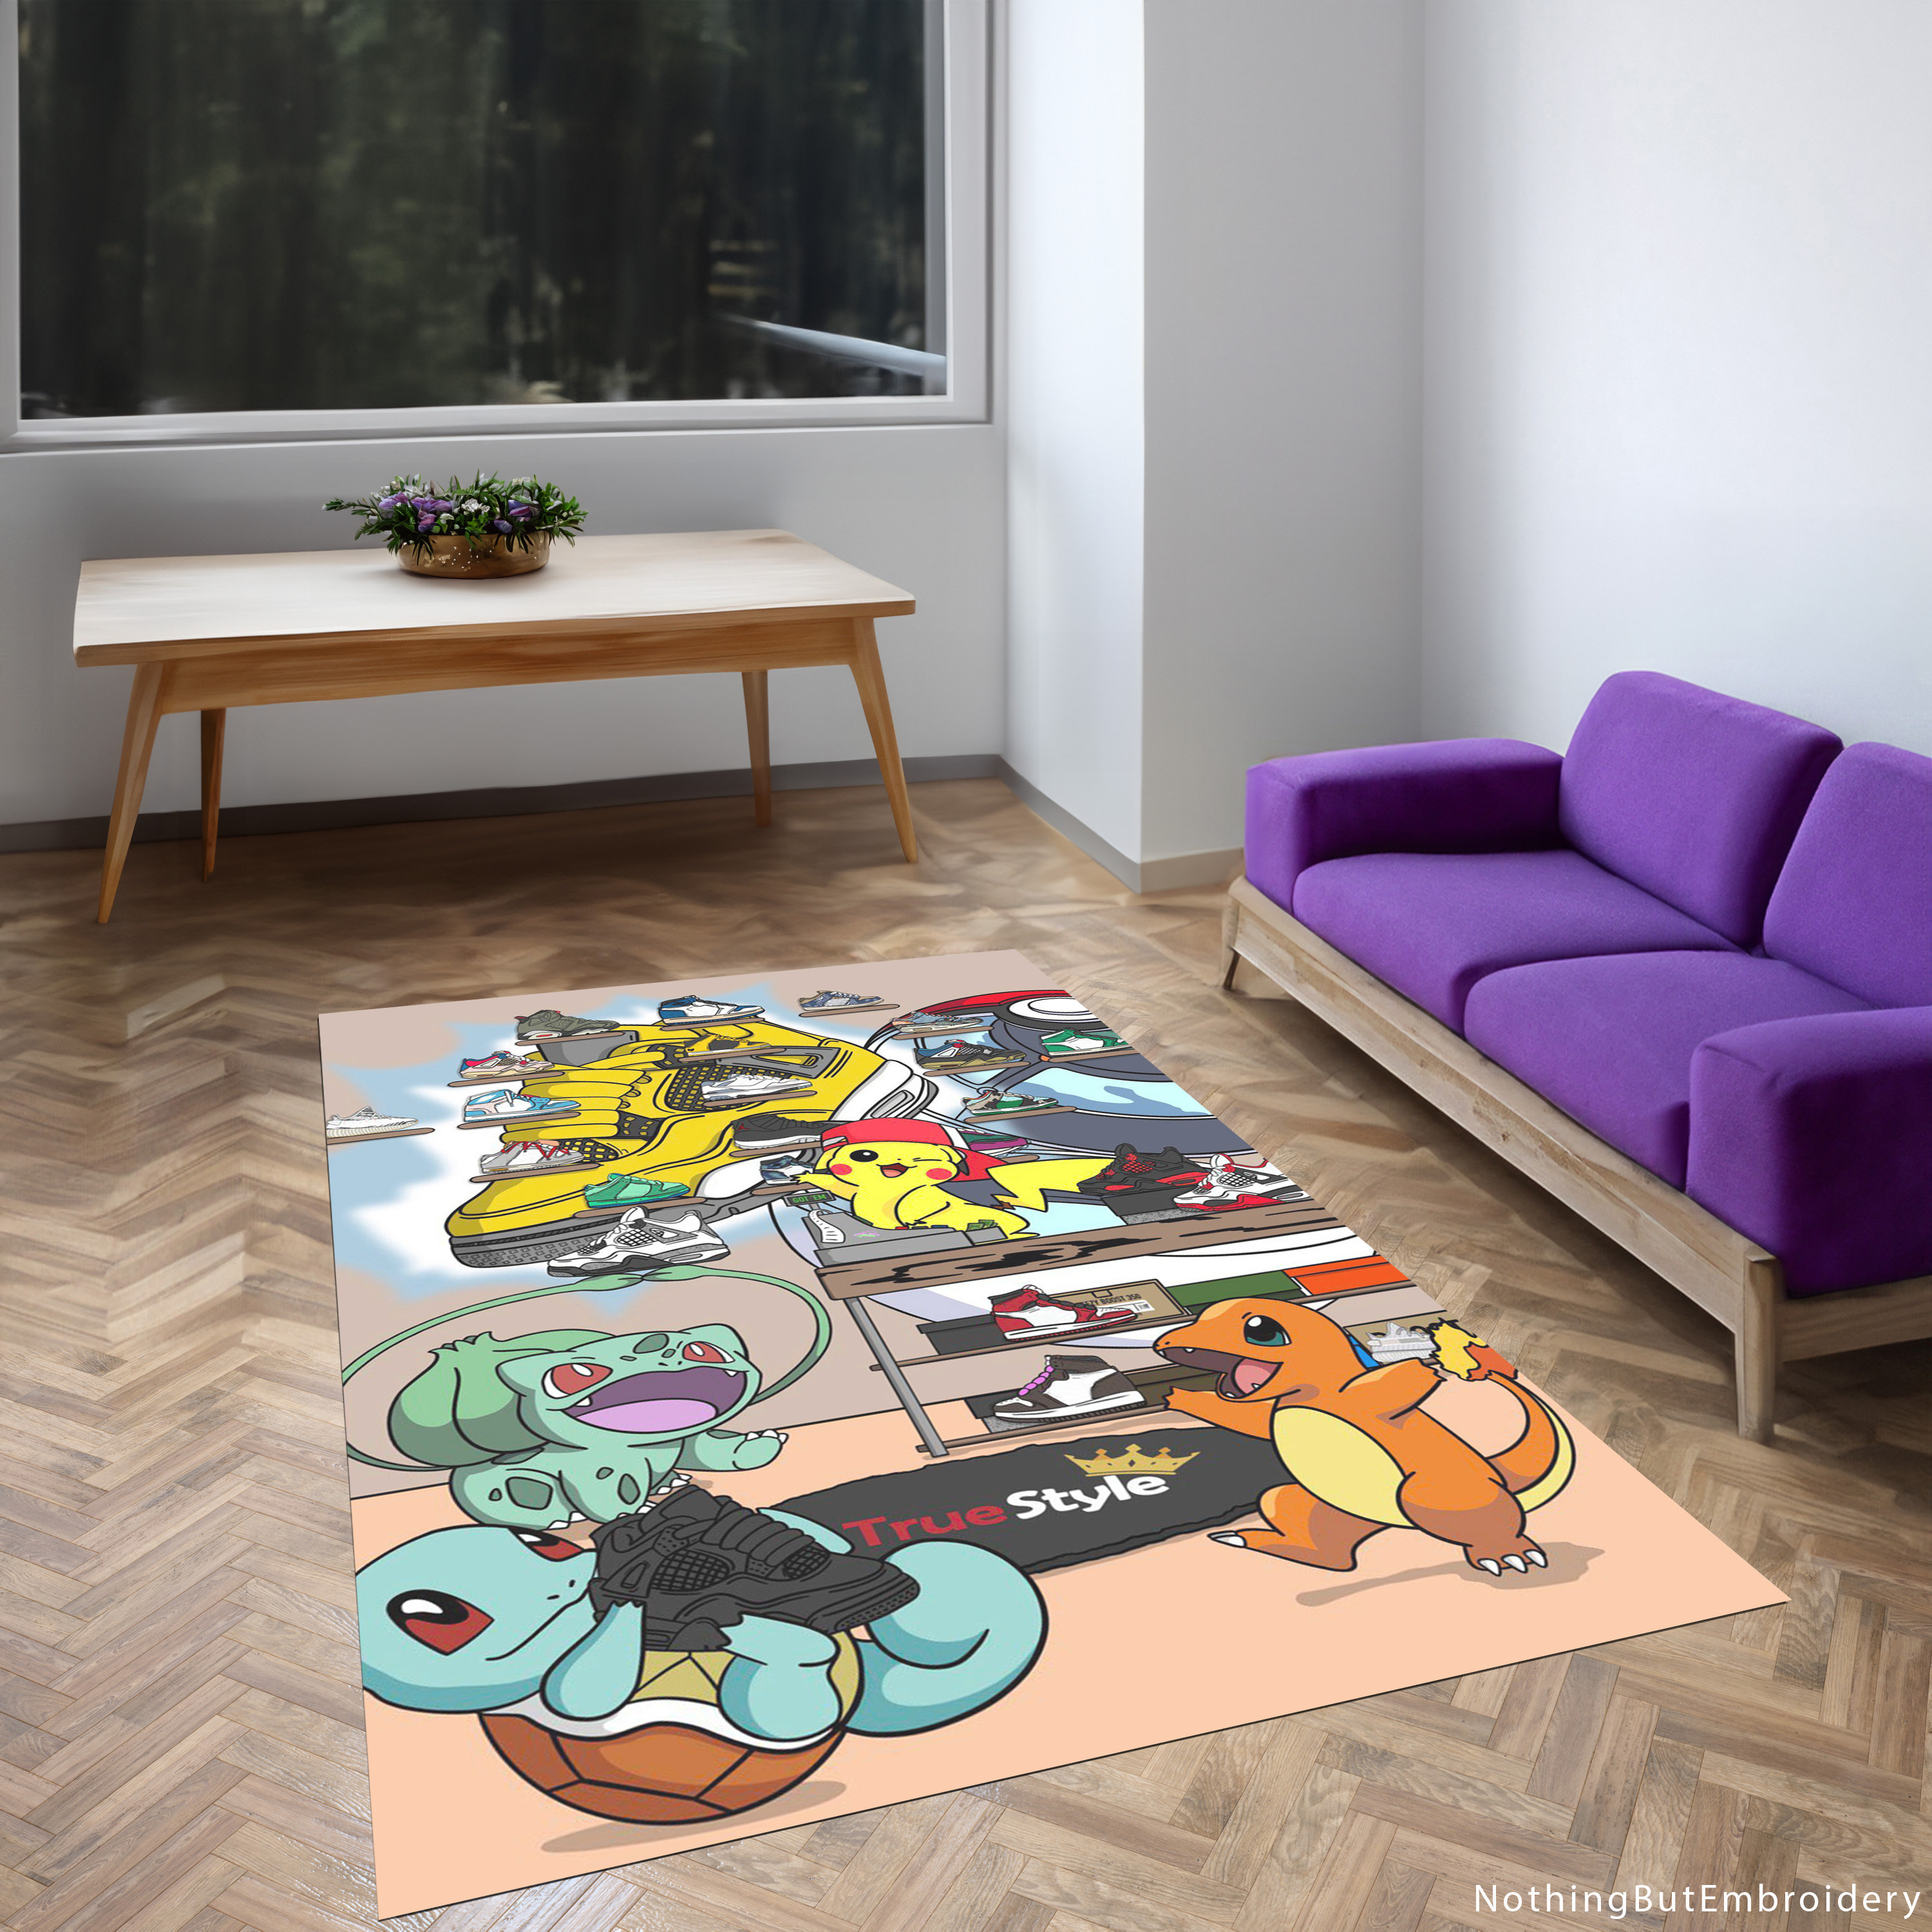 Discover Handmade Modern Rug with Pika and Sneakers Design, Perfect for Kids Room, Unique Print, Novelty PKM Inspired Area Rug, Washable Rug